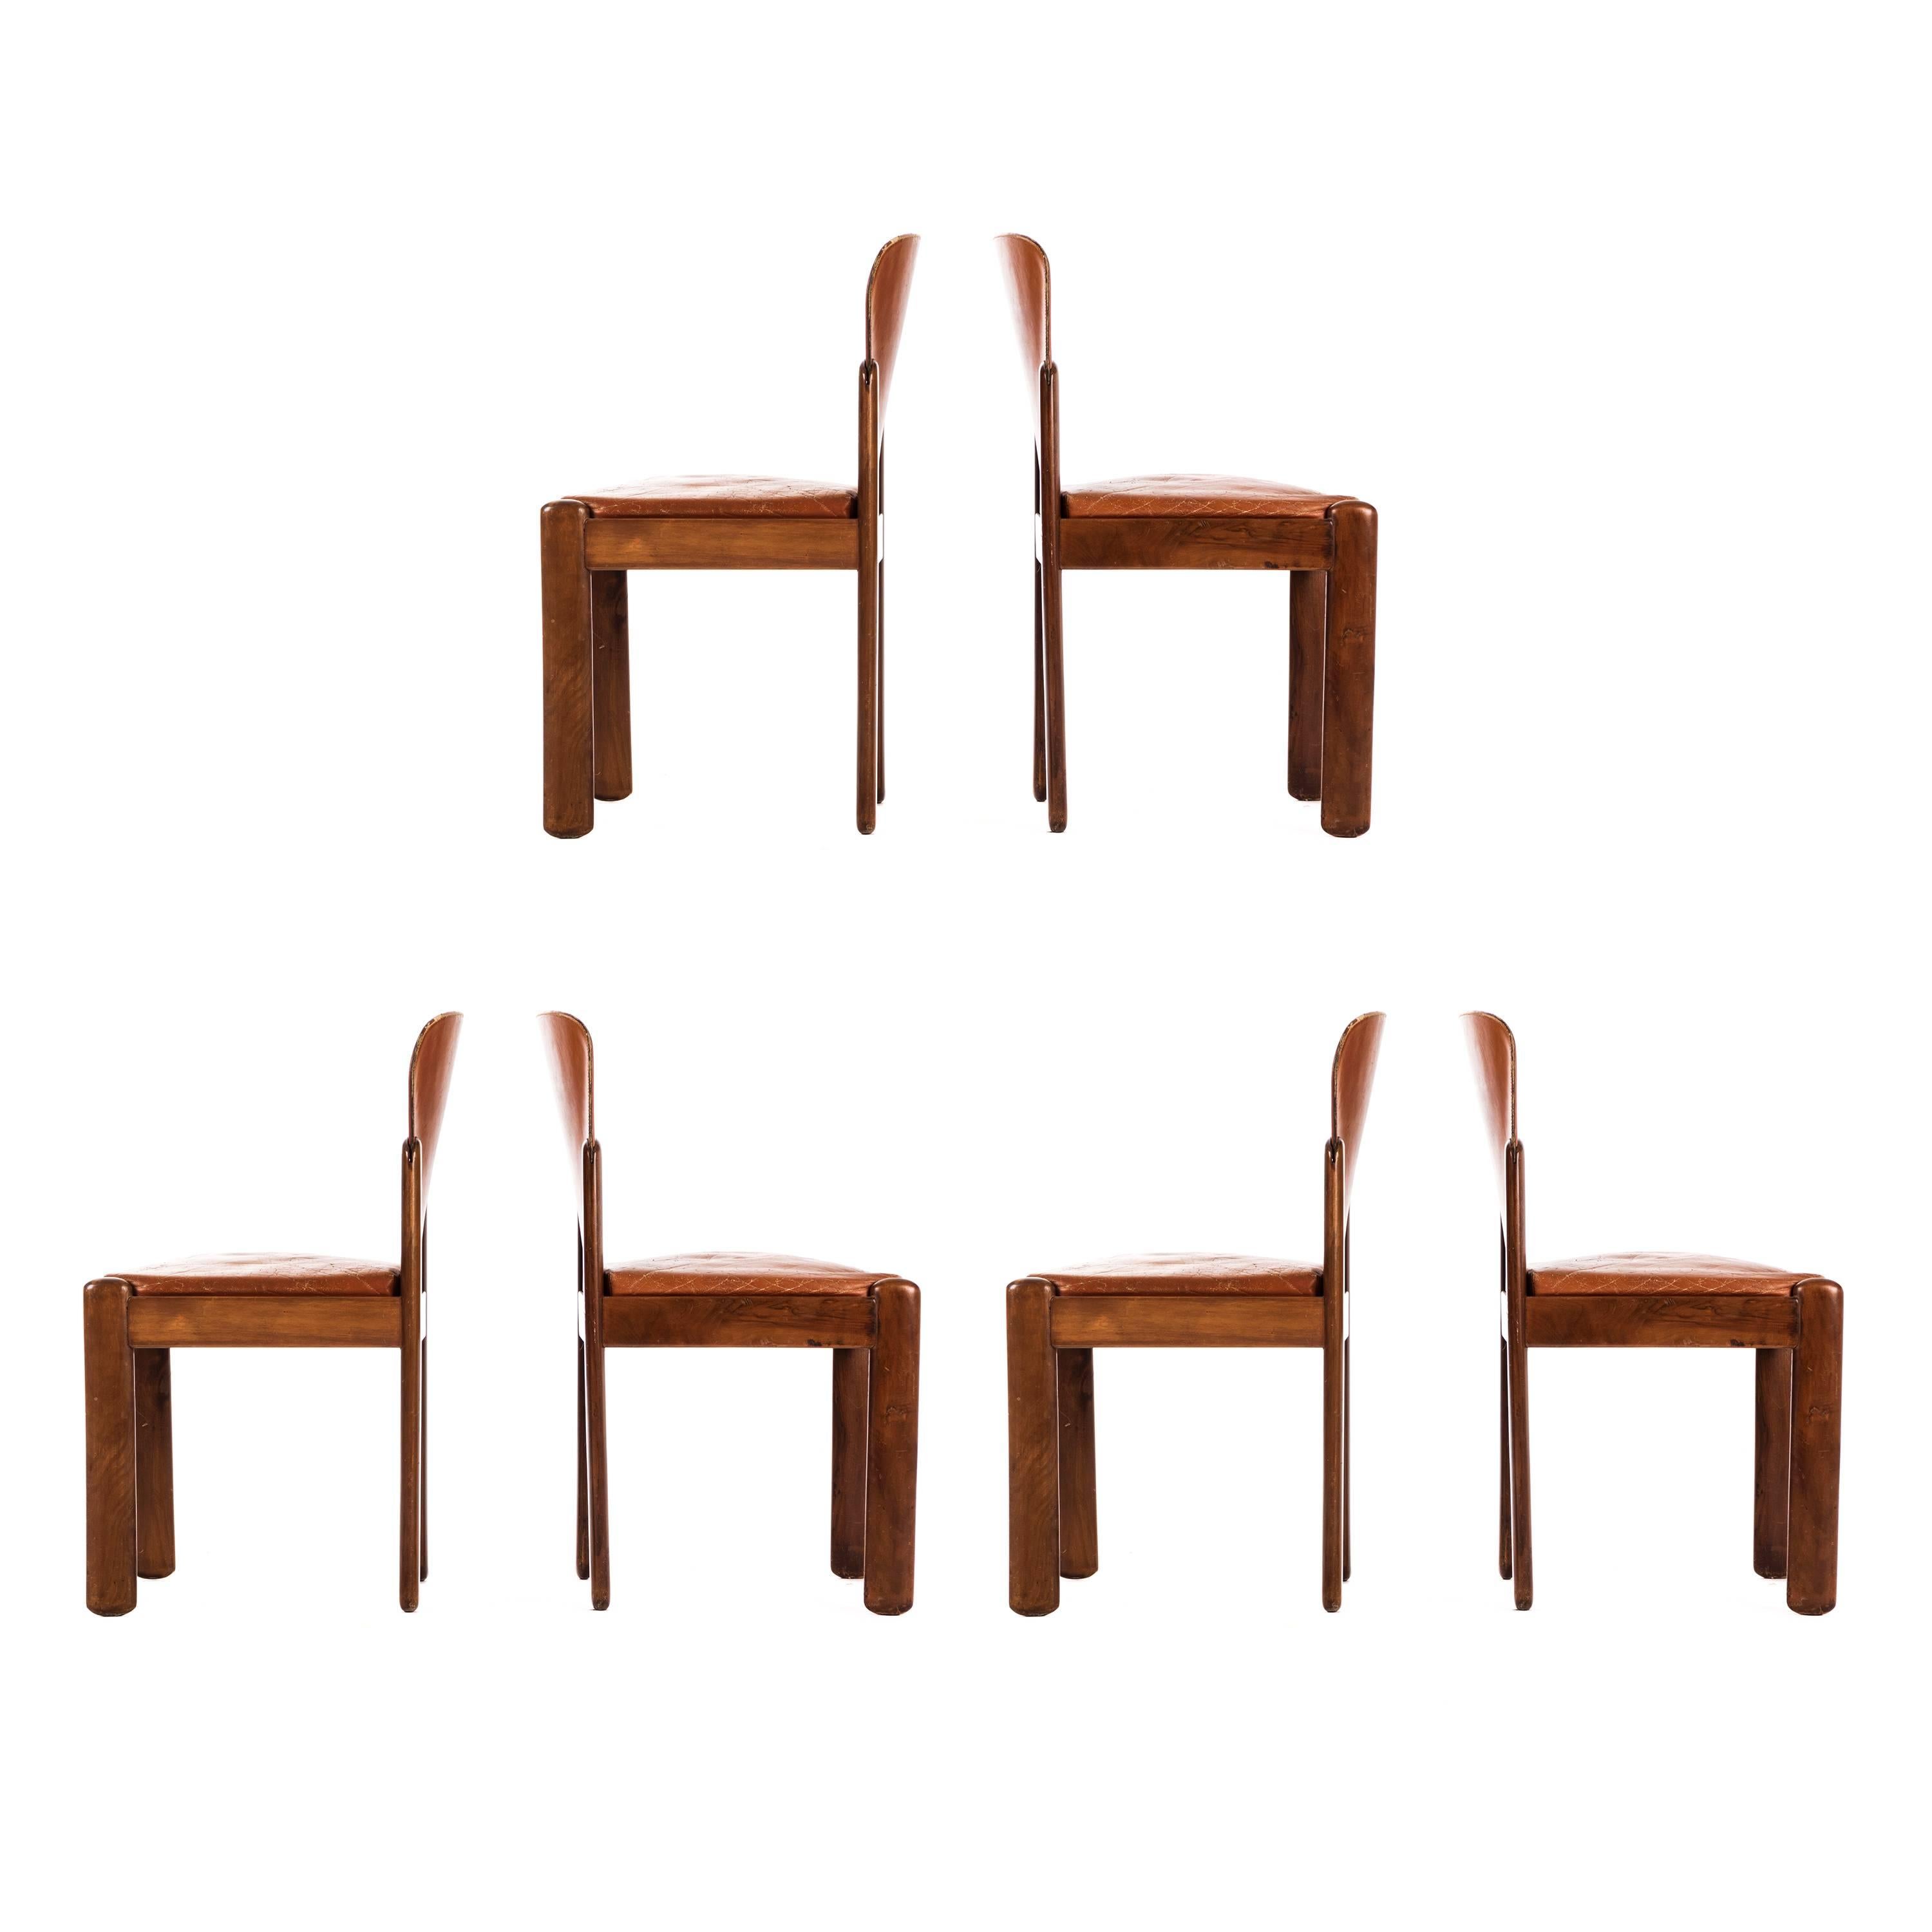 Set of six Silvio Coppola 330 chairs for Bernini. This set of dining chair have a simple stained beech frame with a foam padded leather seat with leather back. The chairs have strong an architectural structure with angular legs and curved backrest.